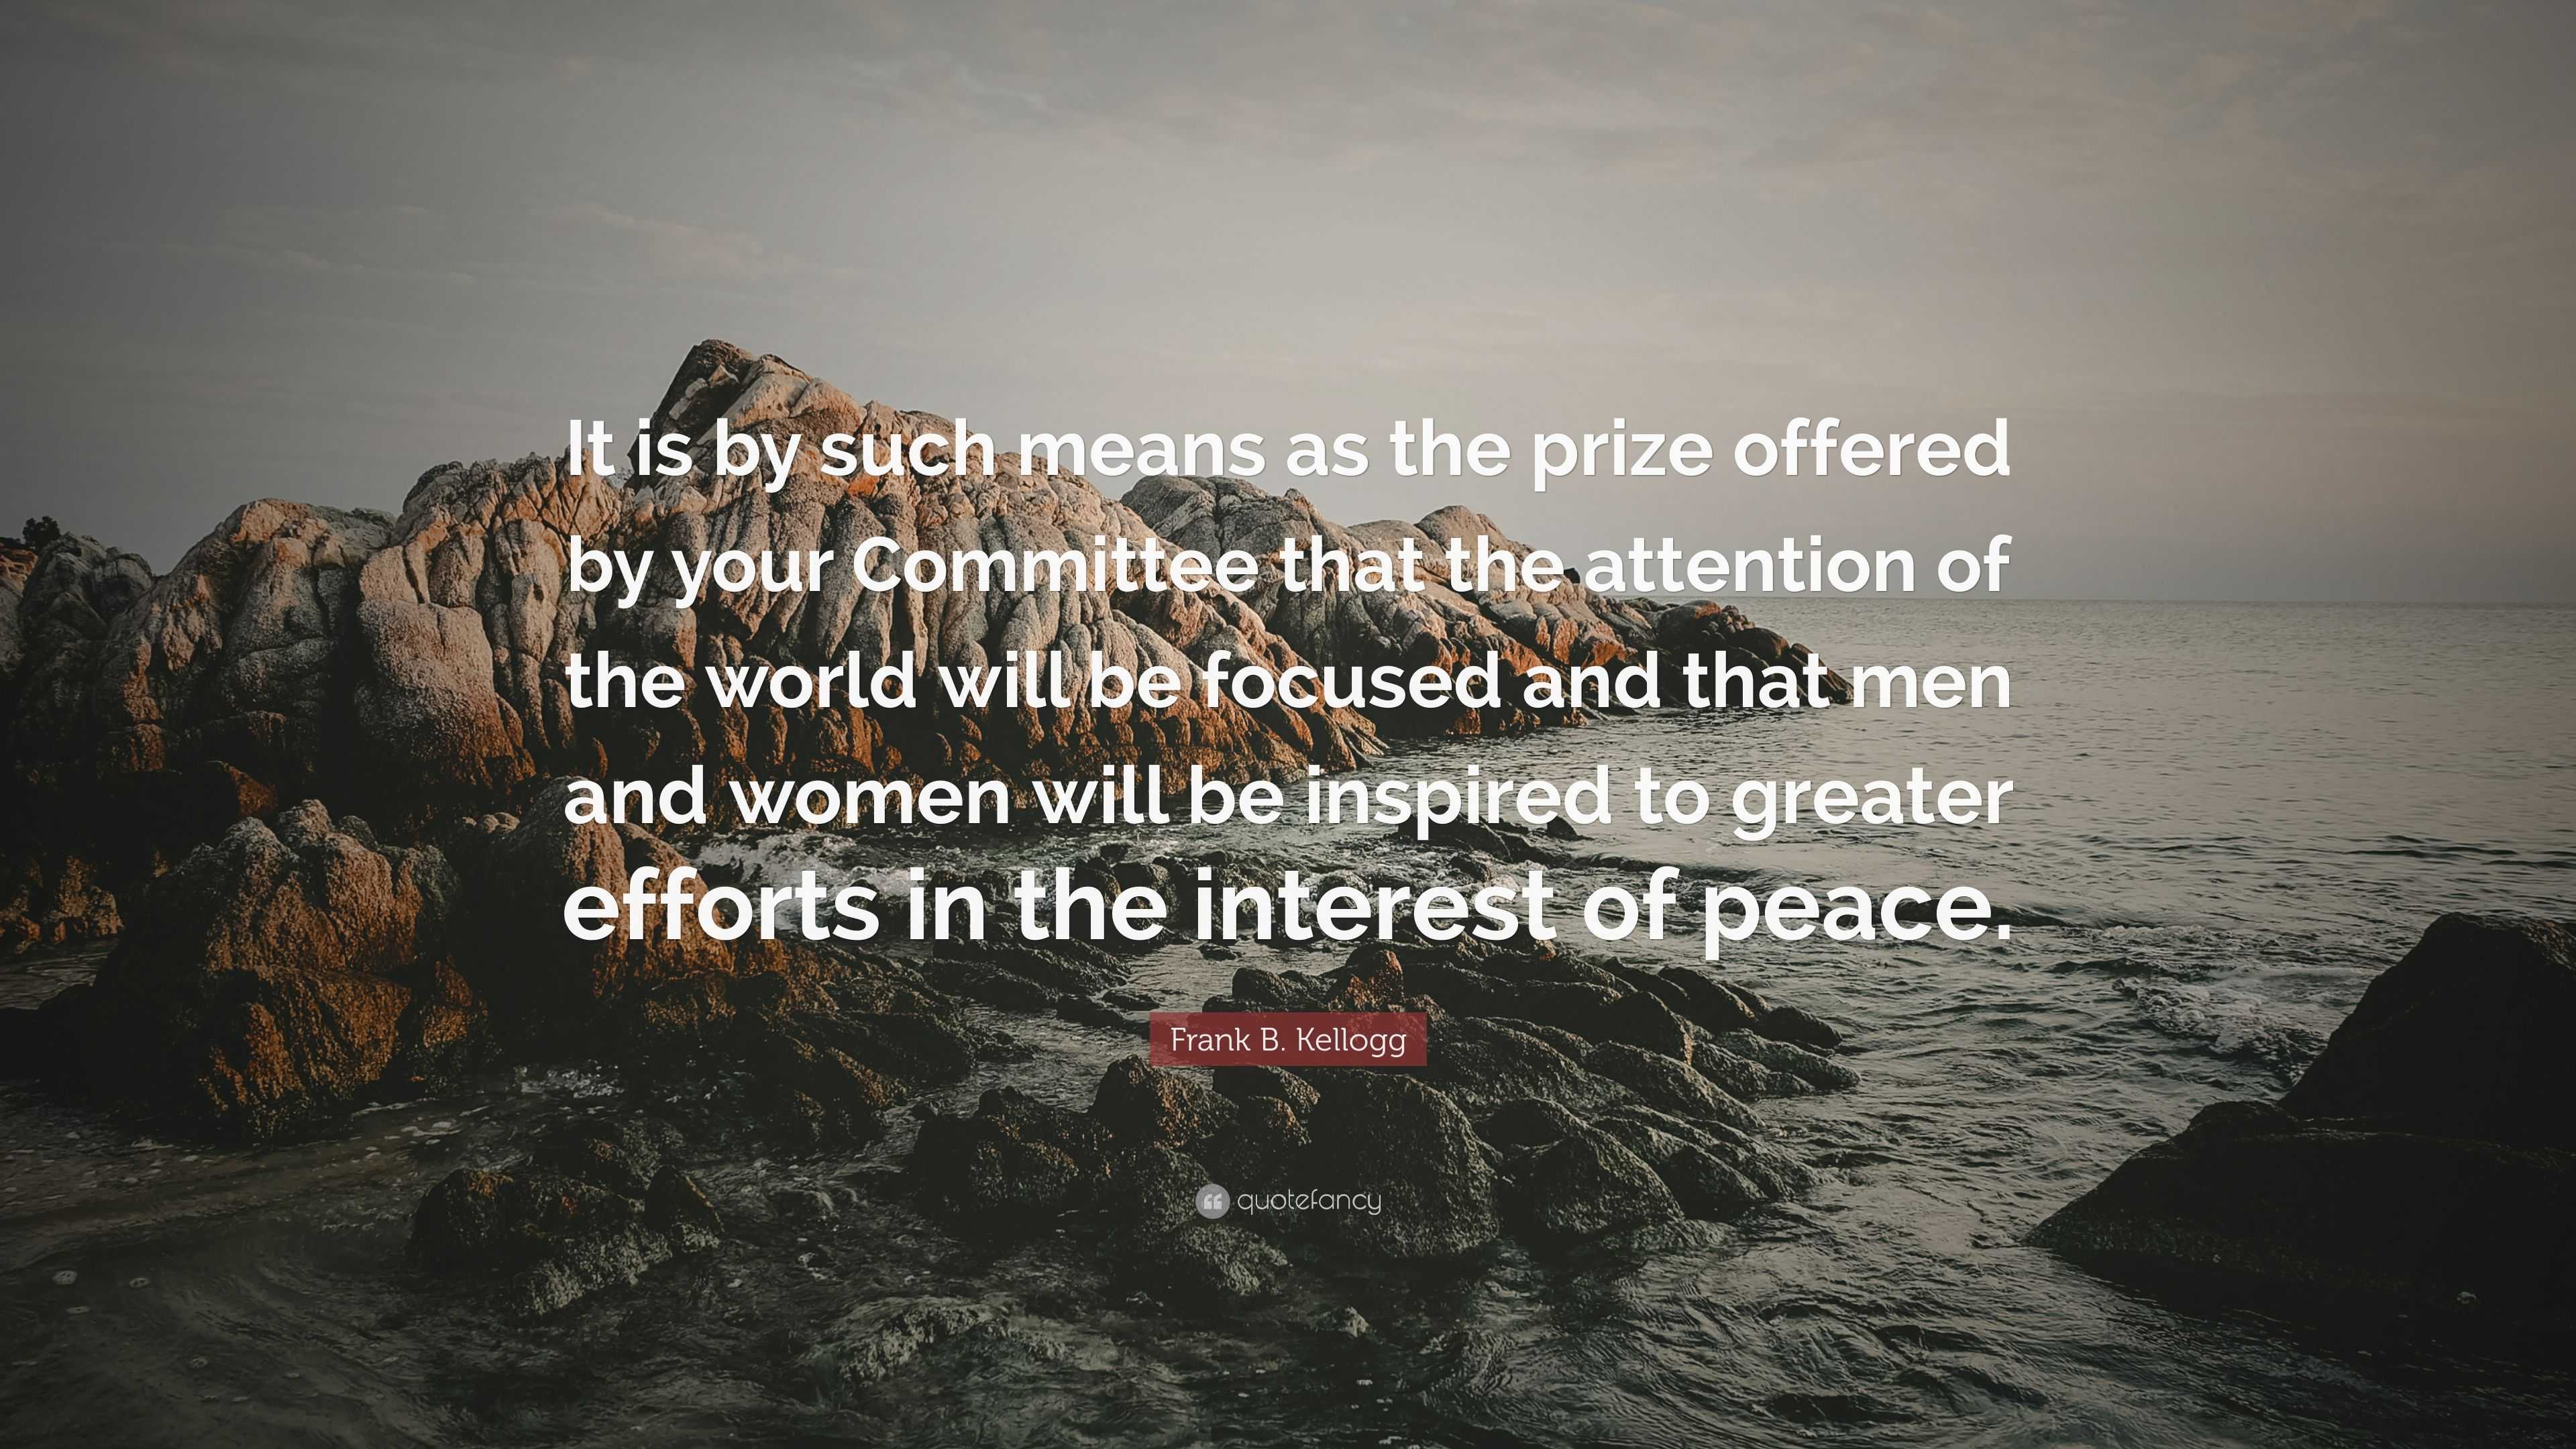 Frank B. Kellogg Quote: “It is by such means as the prize offered by ...